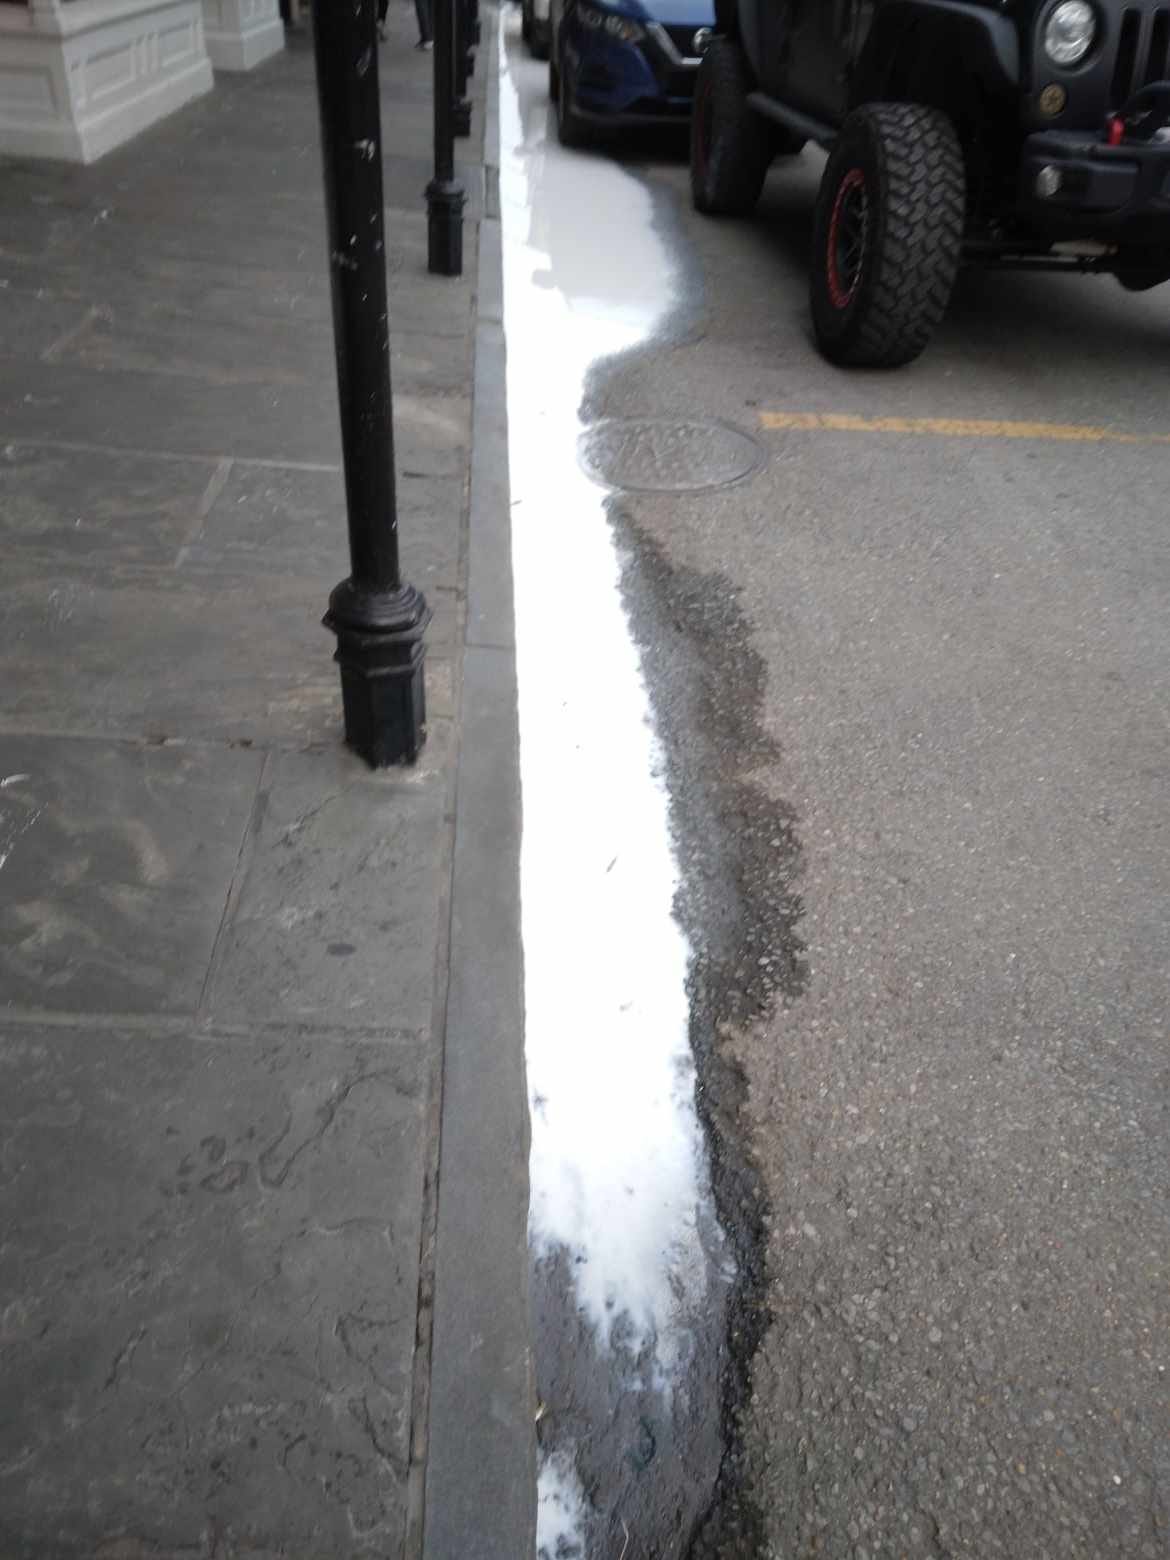 Image shows a sidewalk with what appears to be milk in the gutter running beside it.